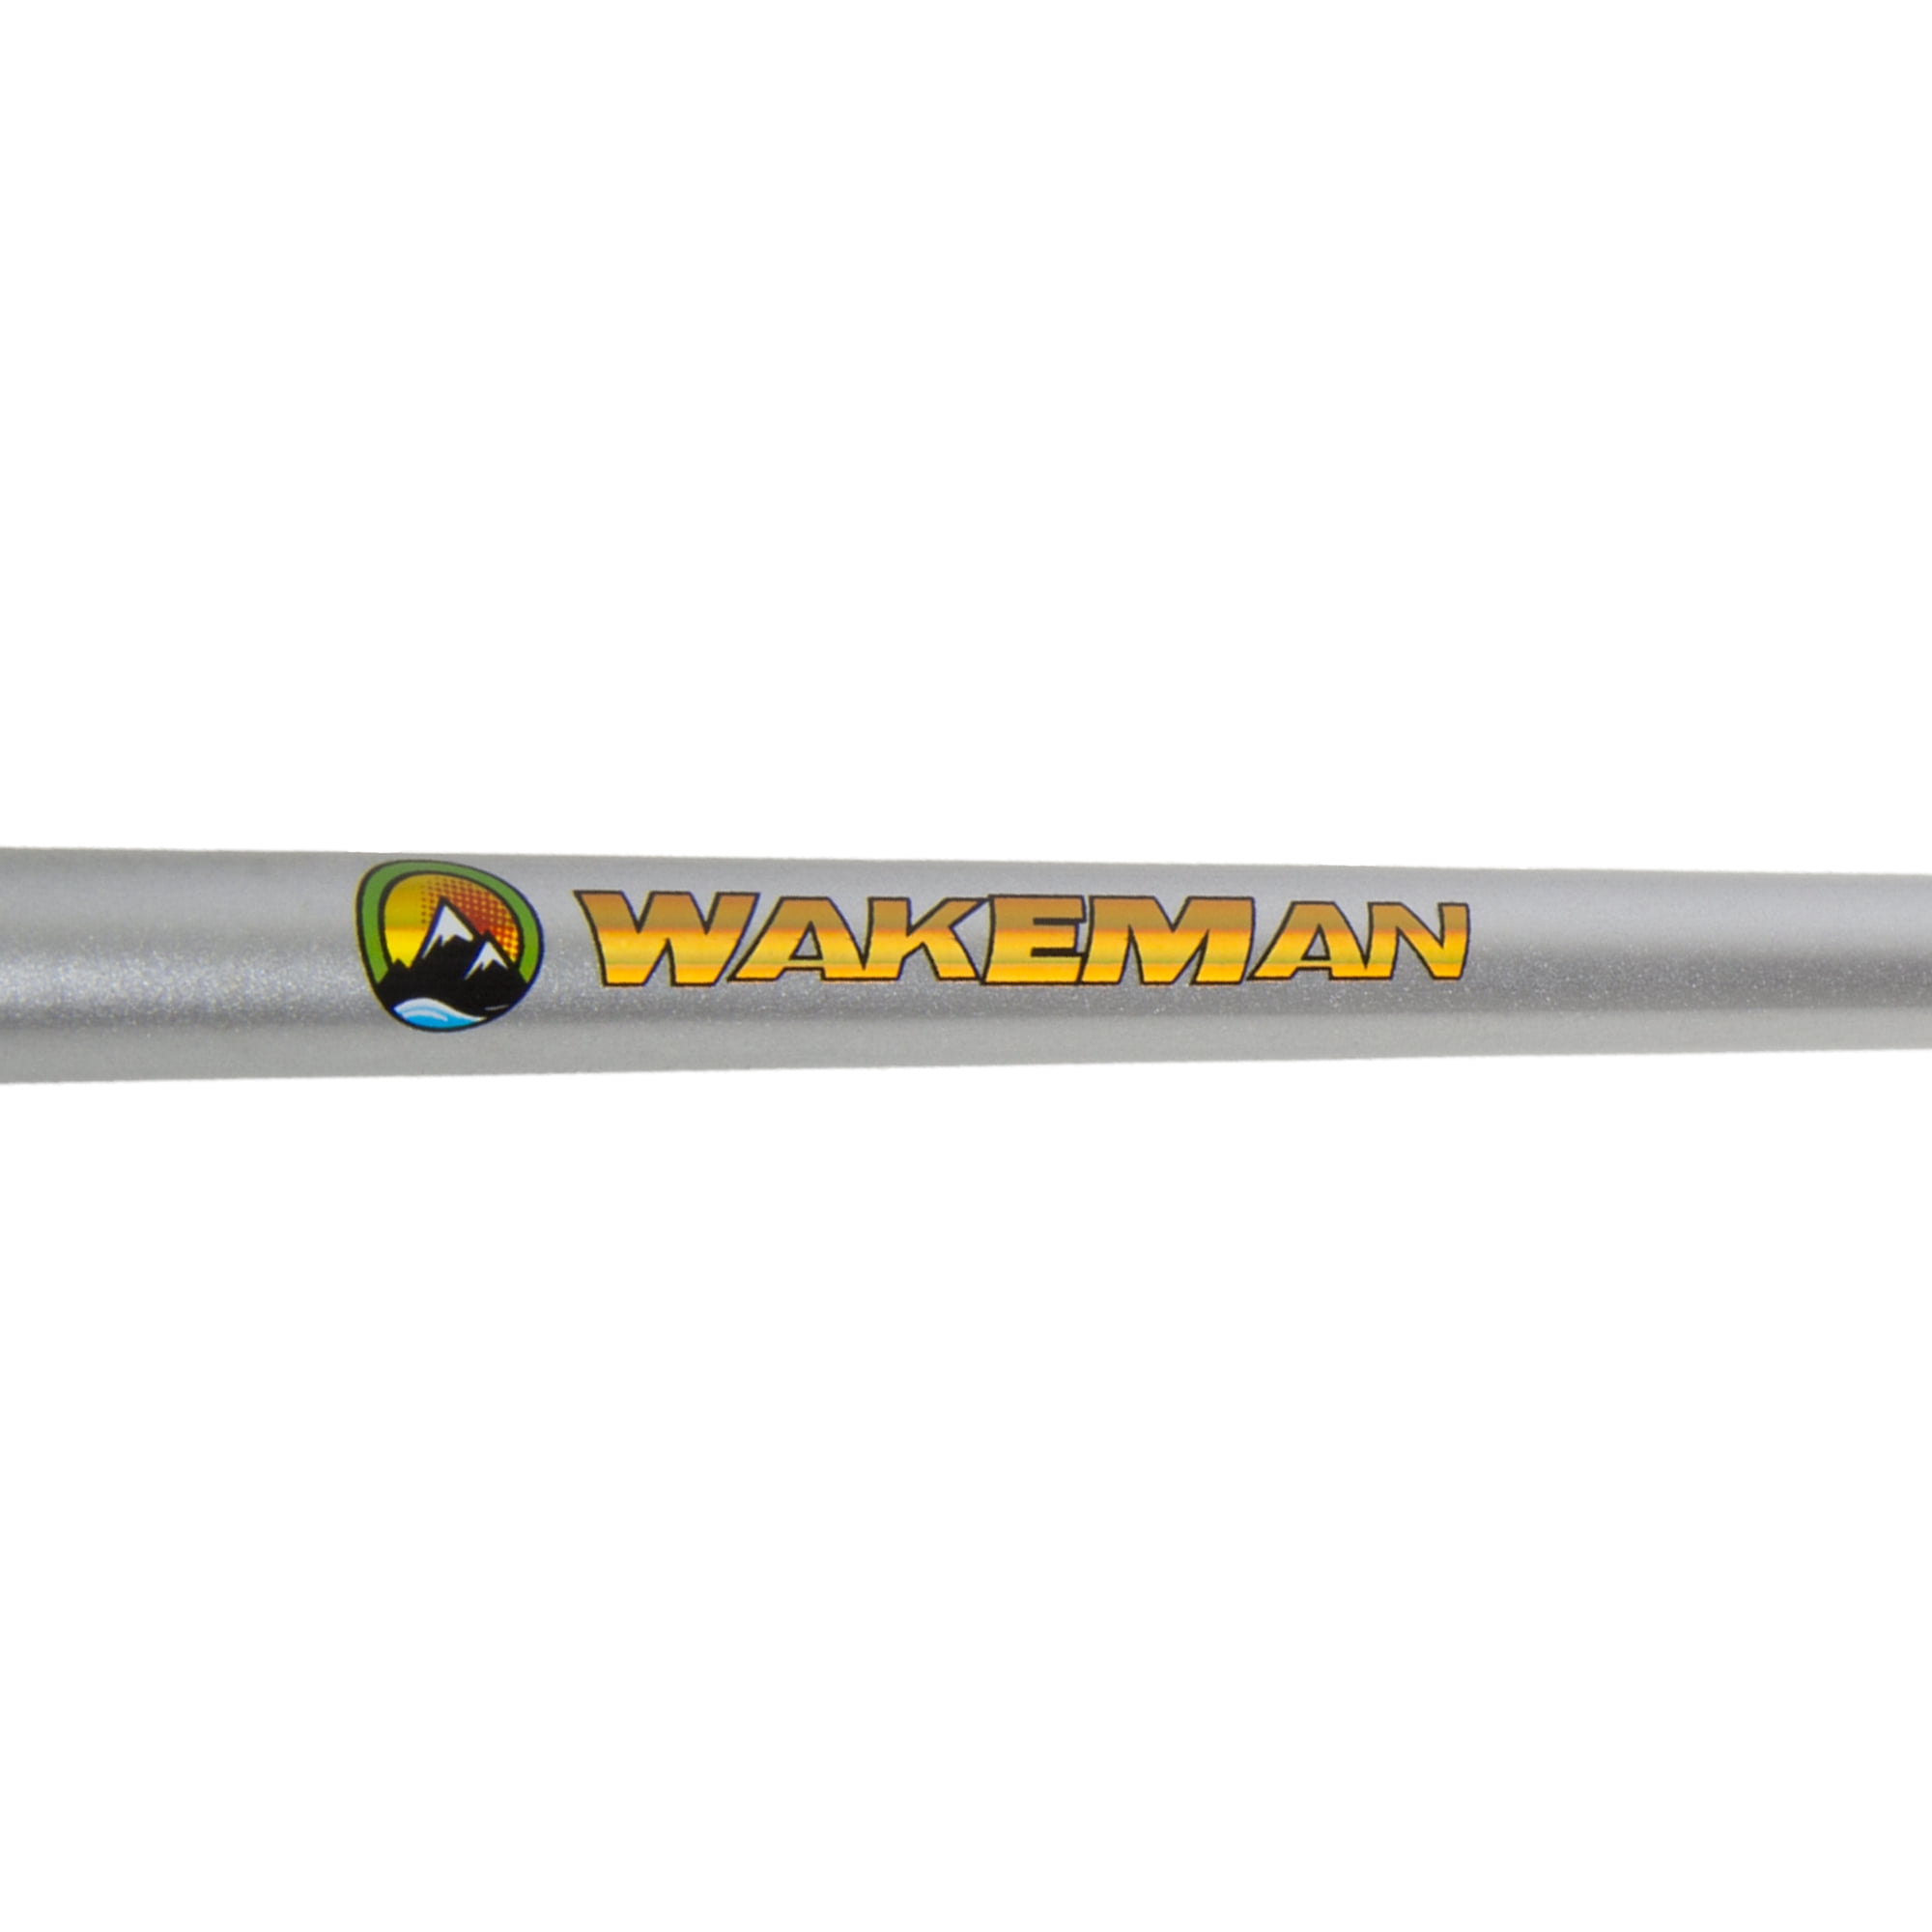 Fishing Rod & Reel Combo-6’ Fiberglass Pole, Spinning Reel for  Beginners-Pre-Spooled with 10lb Test Breakline Series by Wakeman Outdoors